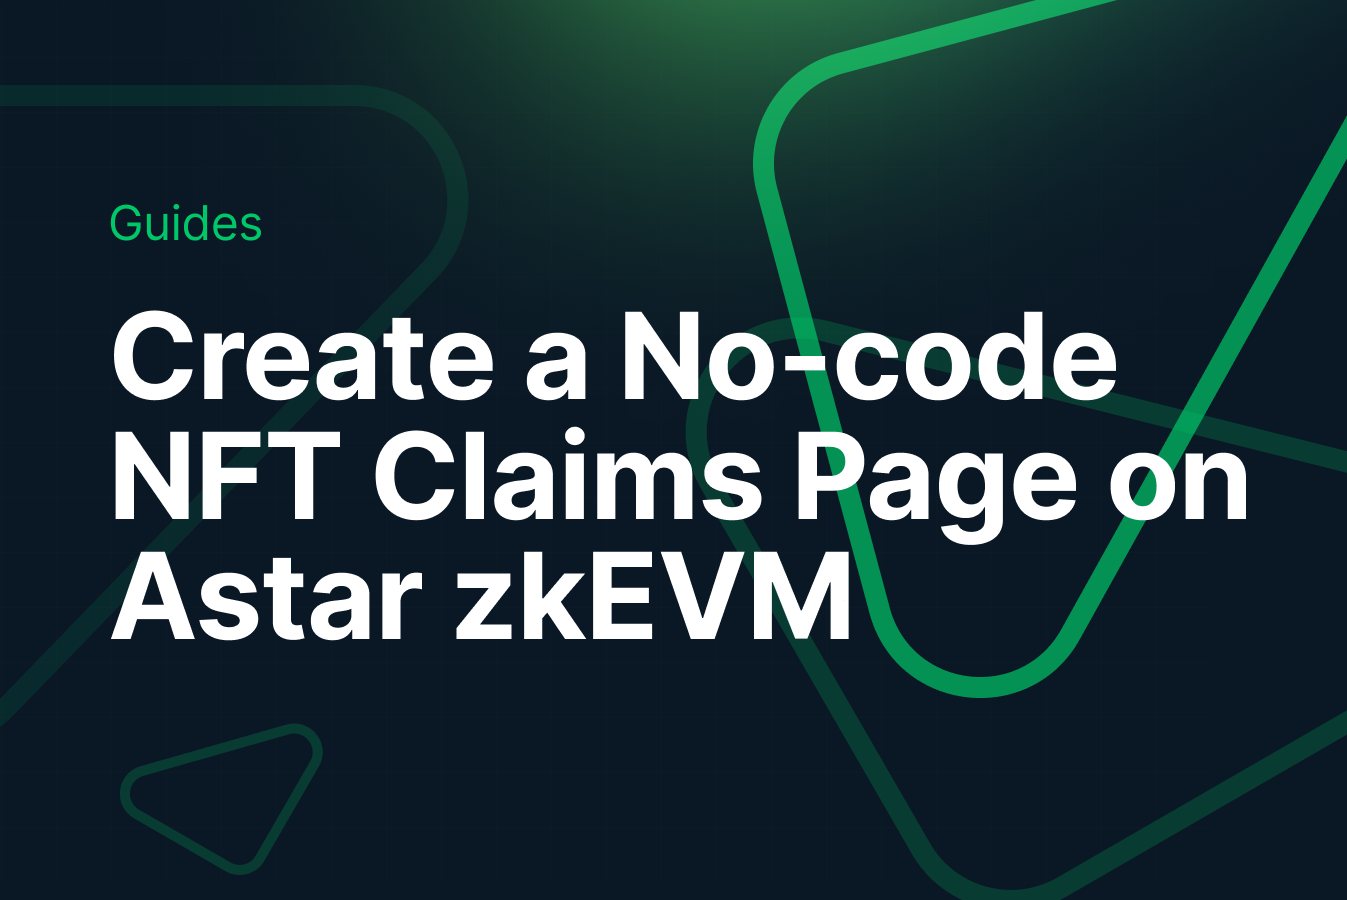 How to Create a No-code Claims Page for your NFT Collection on Astar zkEVM